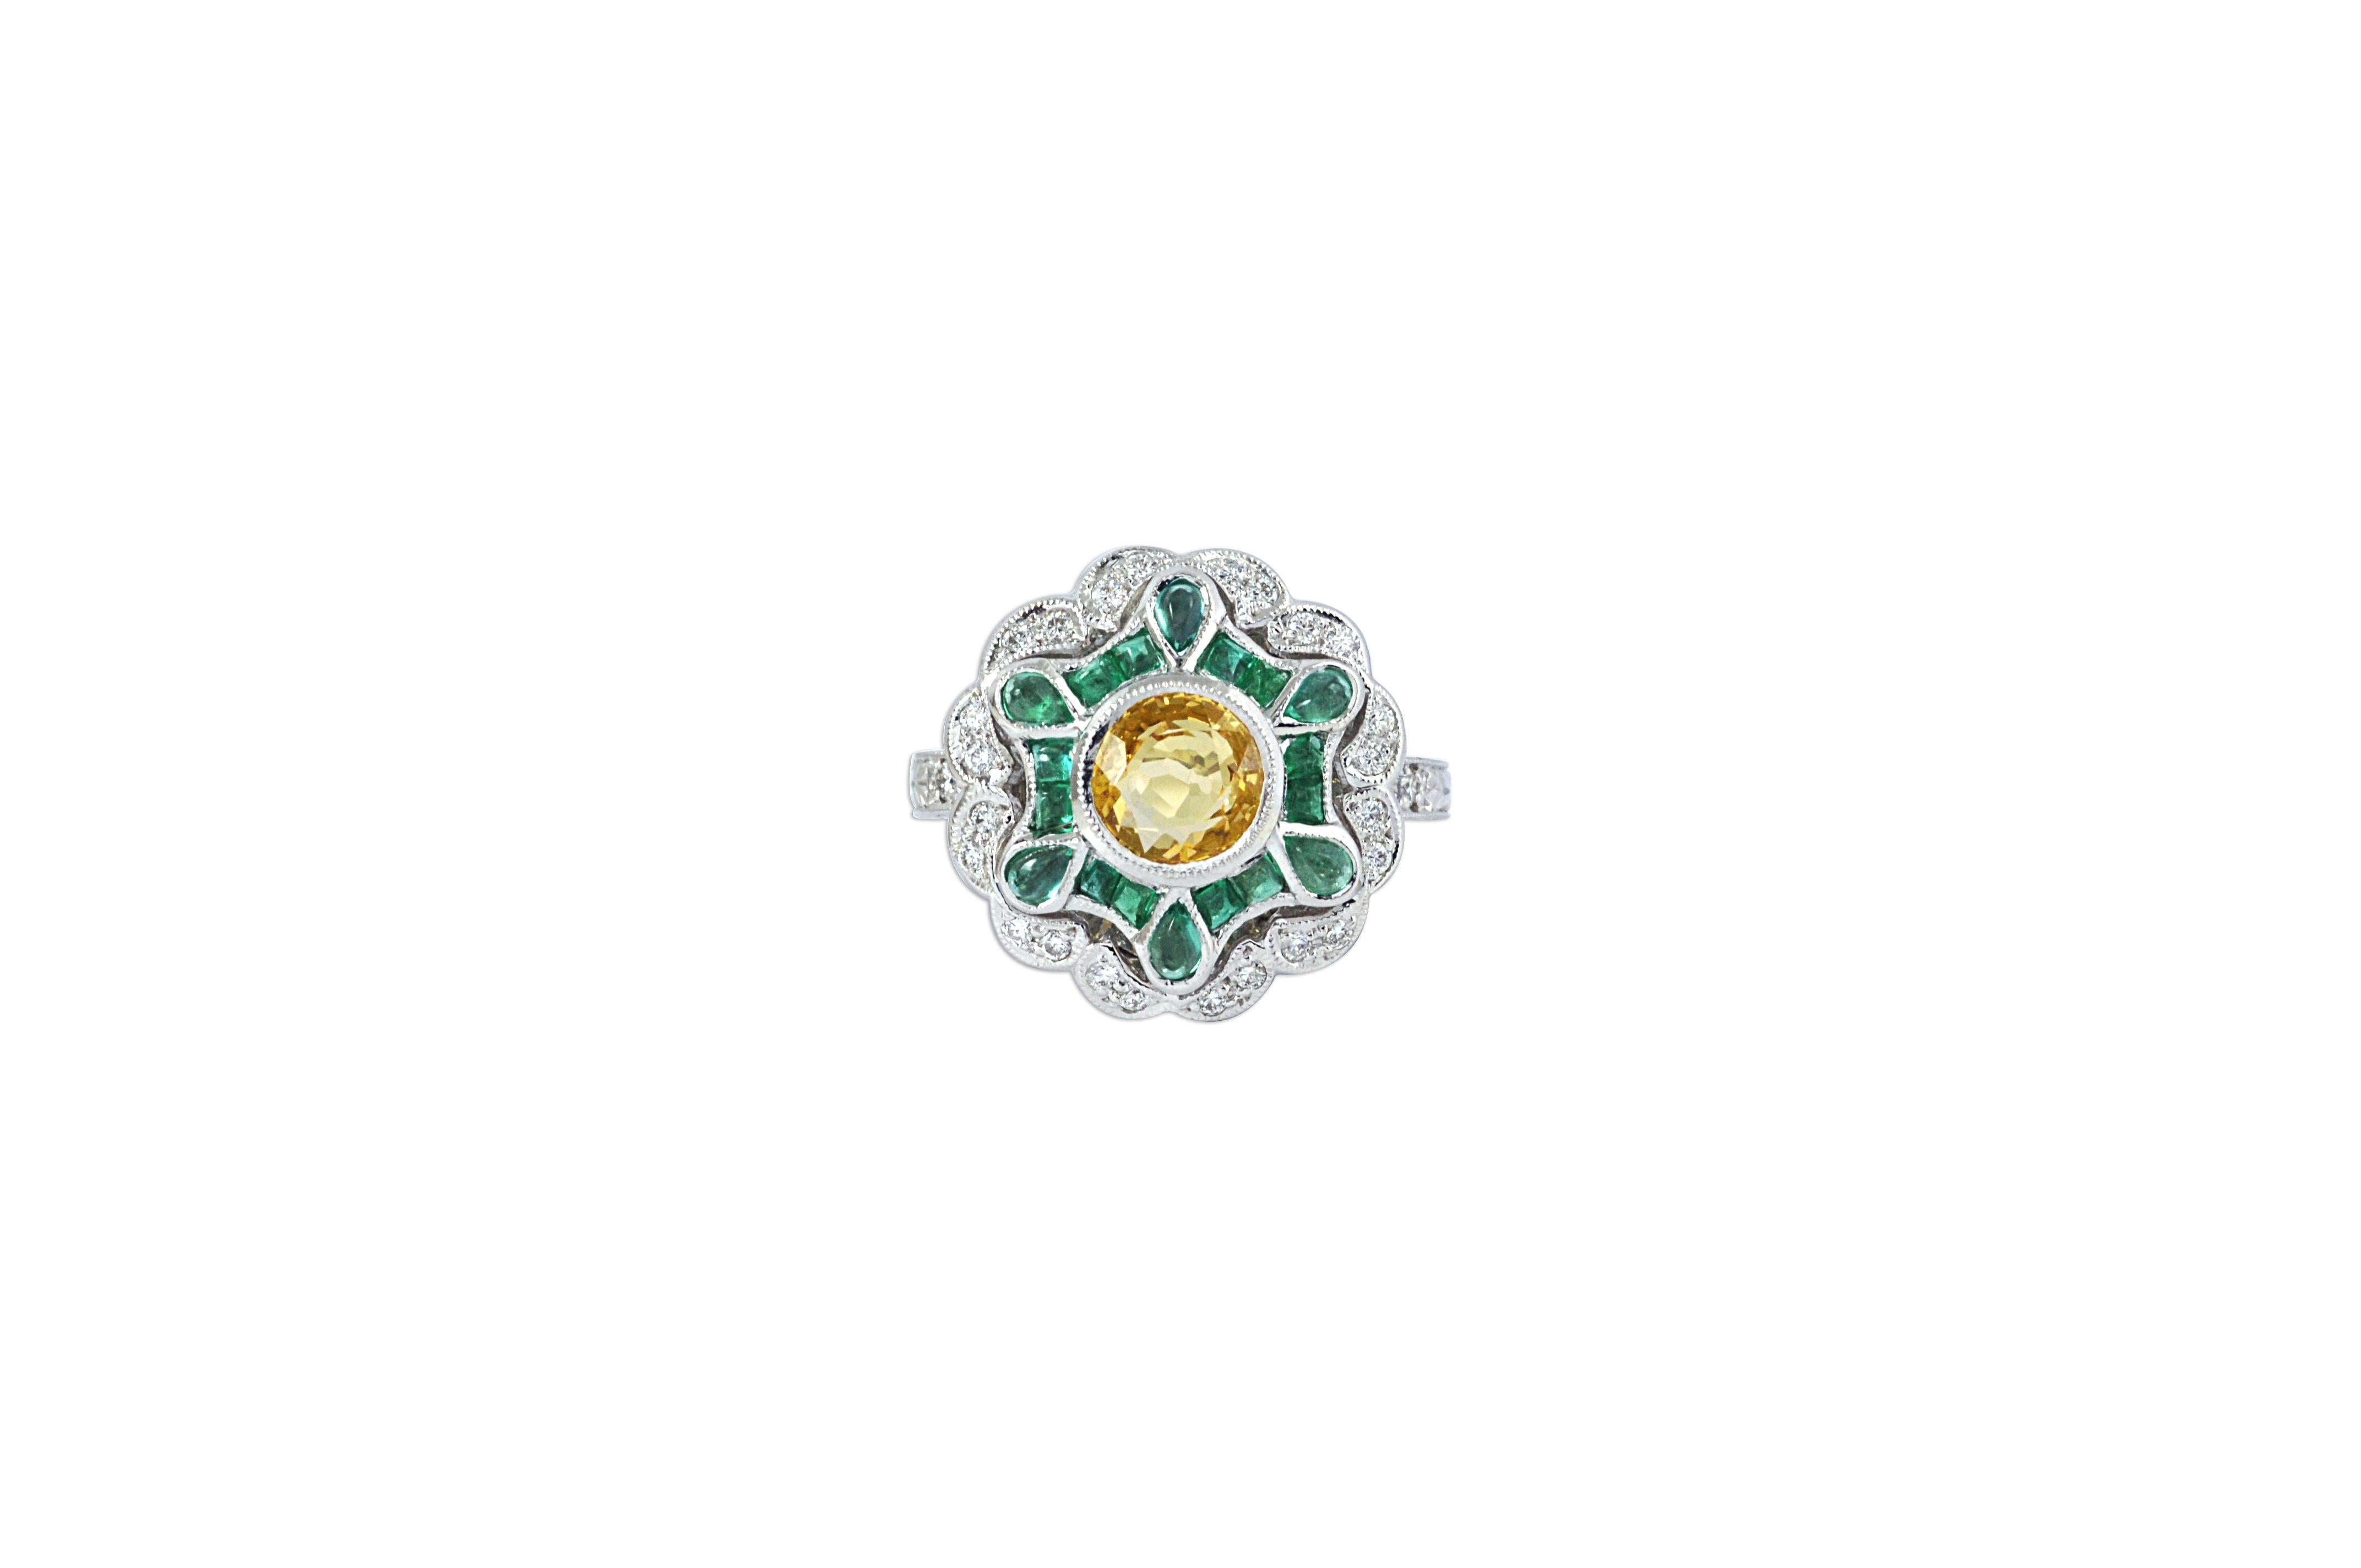 Yellow Sapphire 1.72 carats with Emerald 1.23 carats with Diamond 0.29 carat Ring set in 18 Karat White Gold Settings

Width: 2 cm
Length: 2 cm 
Ring Size:  54

